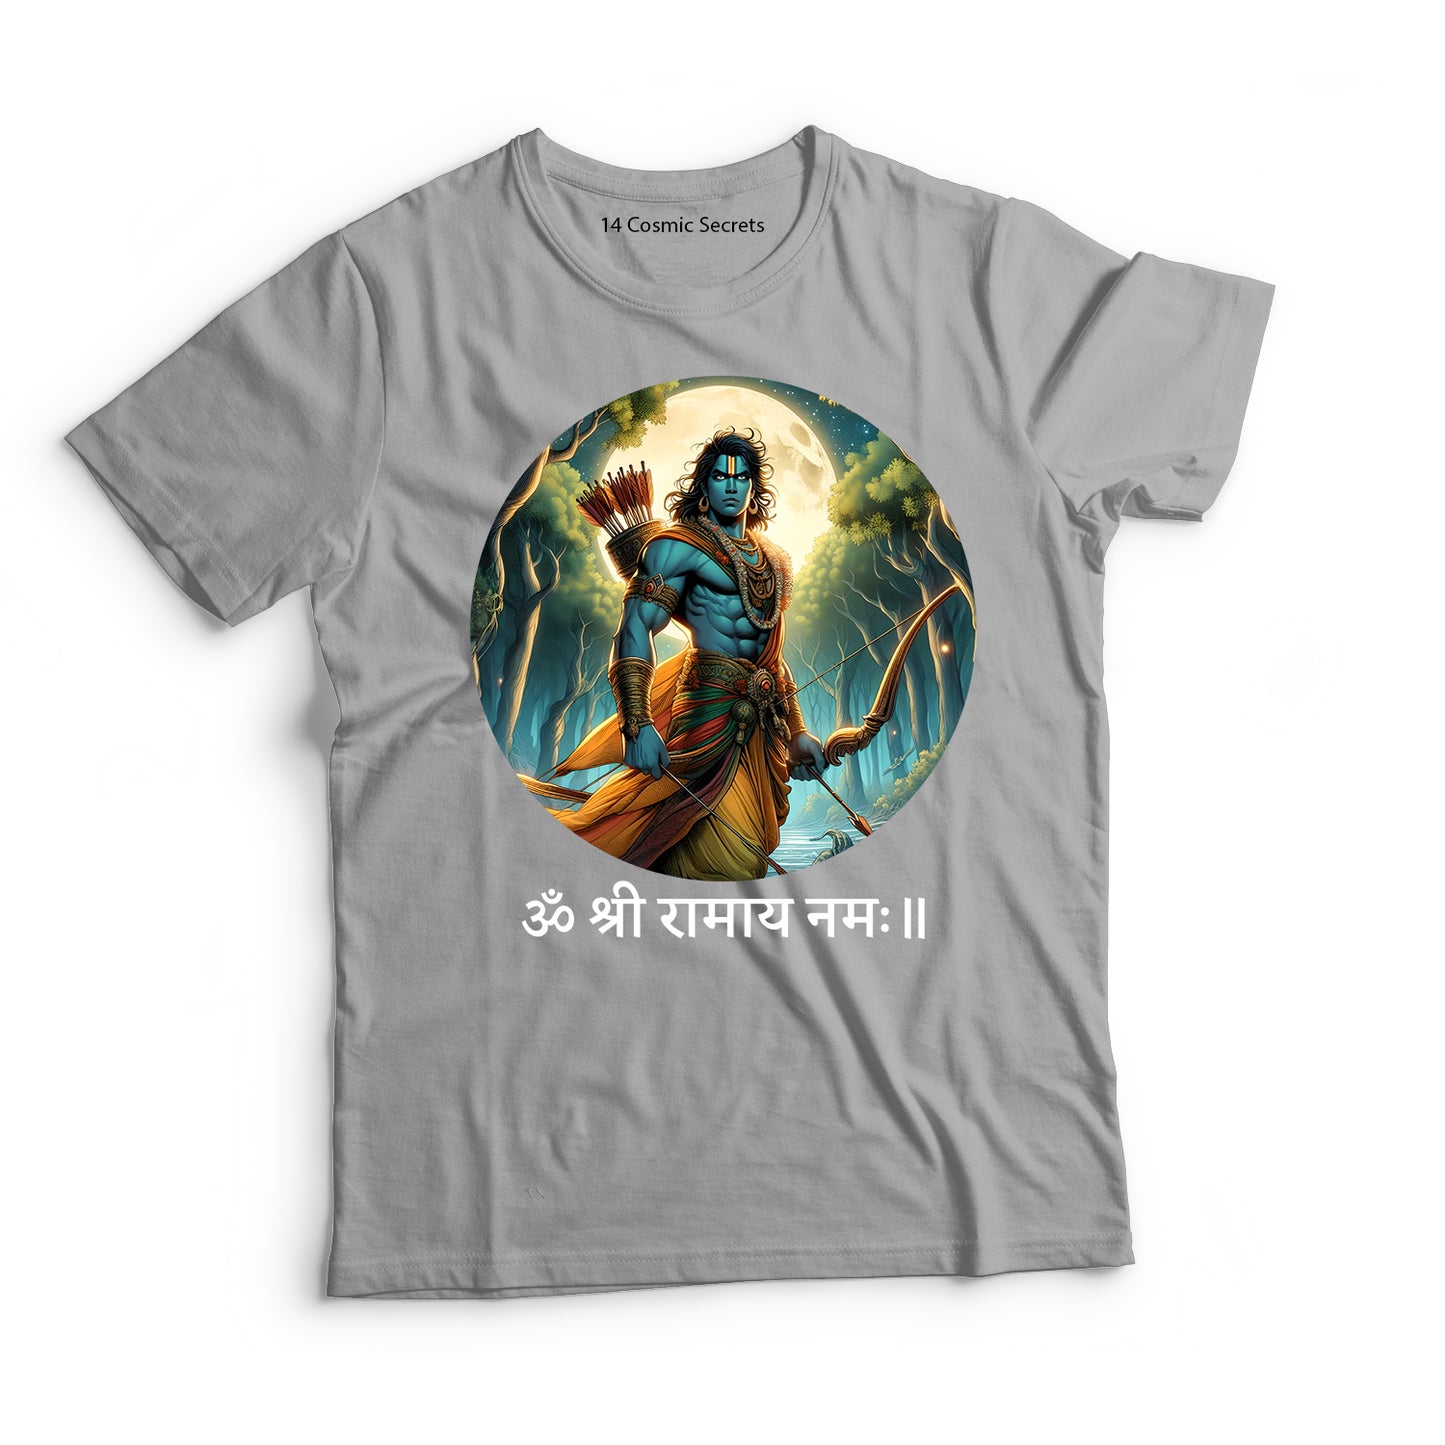 Rama's Dharma: Path of Righteousness Graphic Printed T-Shirt for Men Cotton T-Shirt Original Super Heroes of India T-Shirt